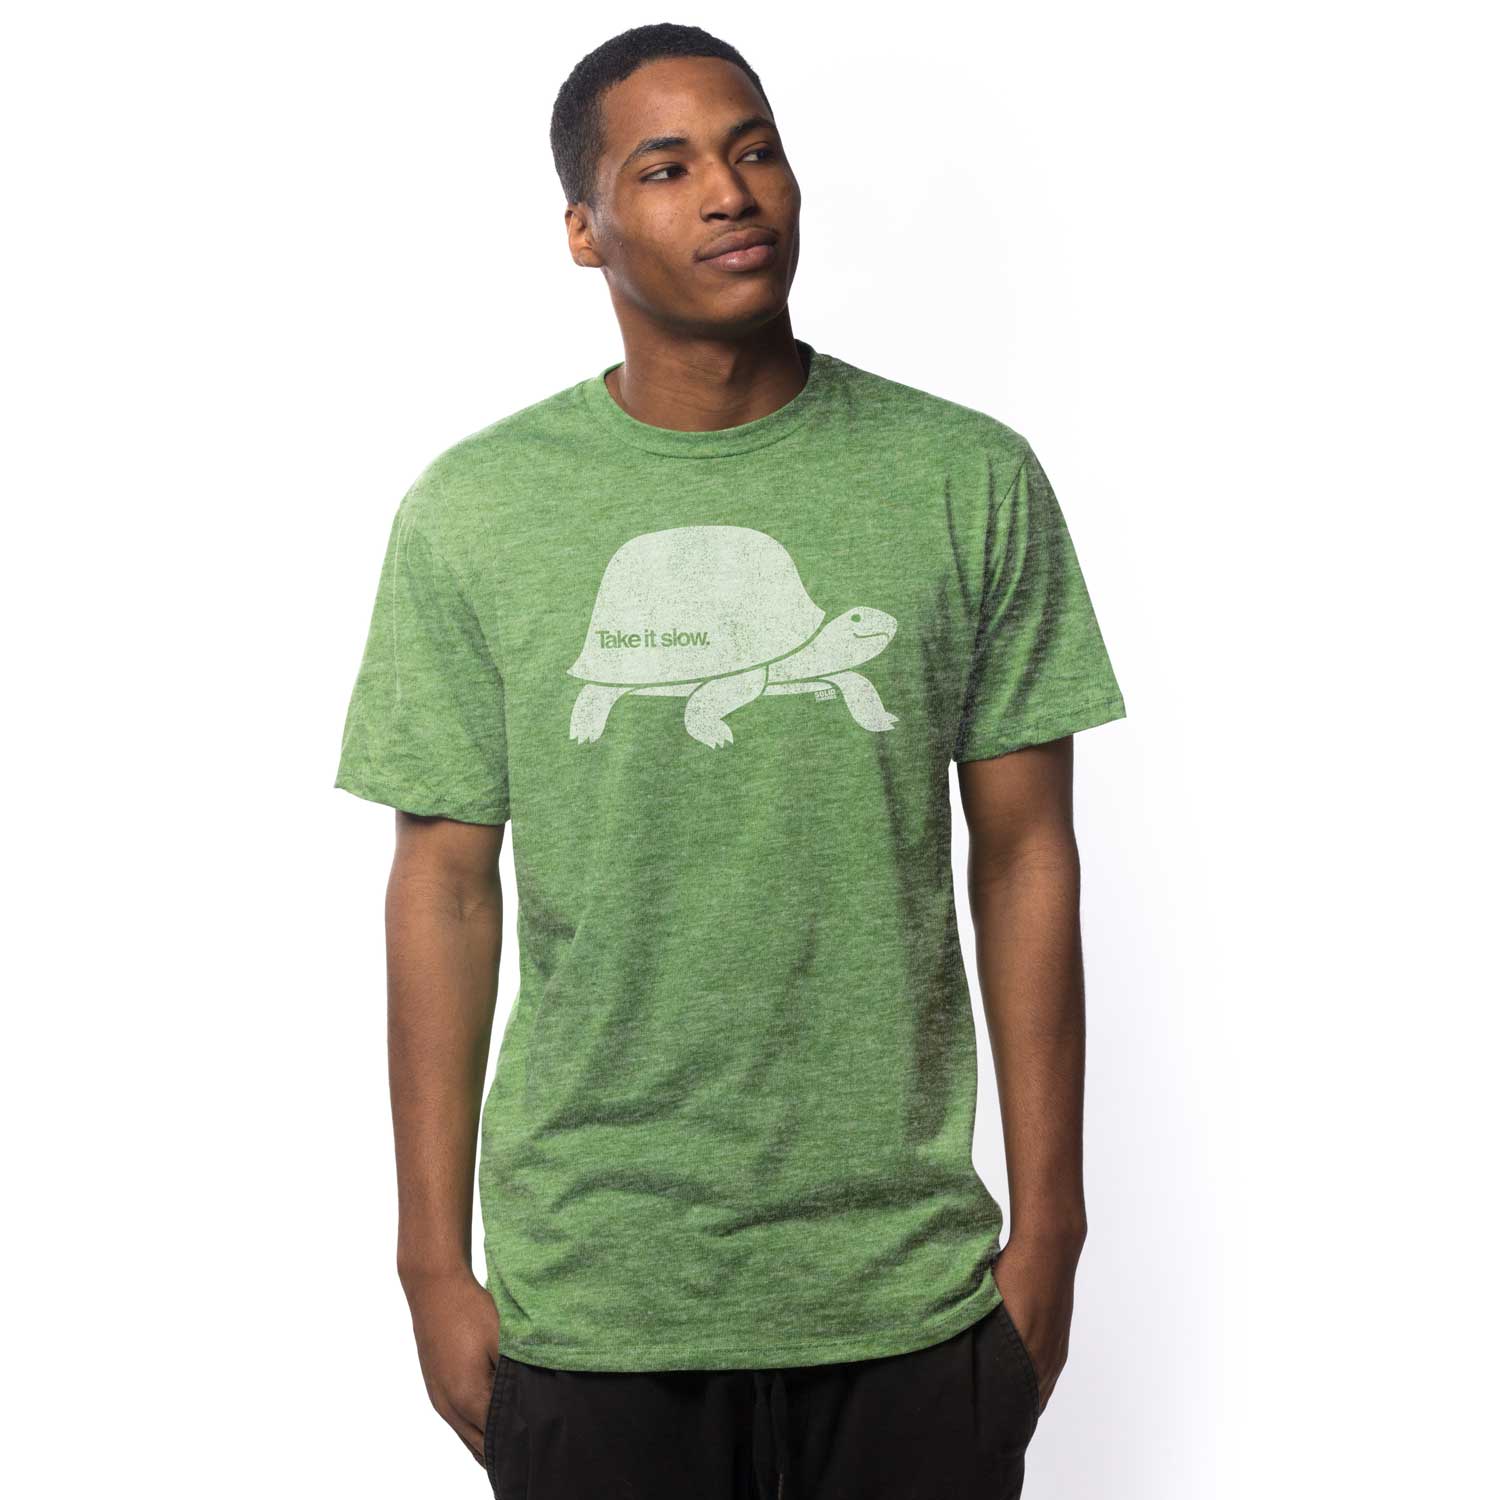 Take It Slow Vintage Turtle T-Shirt Cool Mindfulness T-Shirt Solid Threads